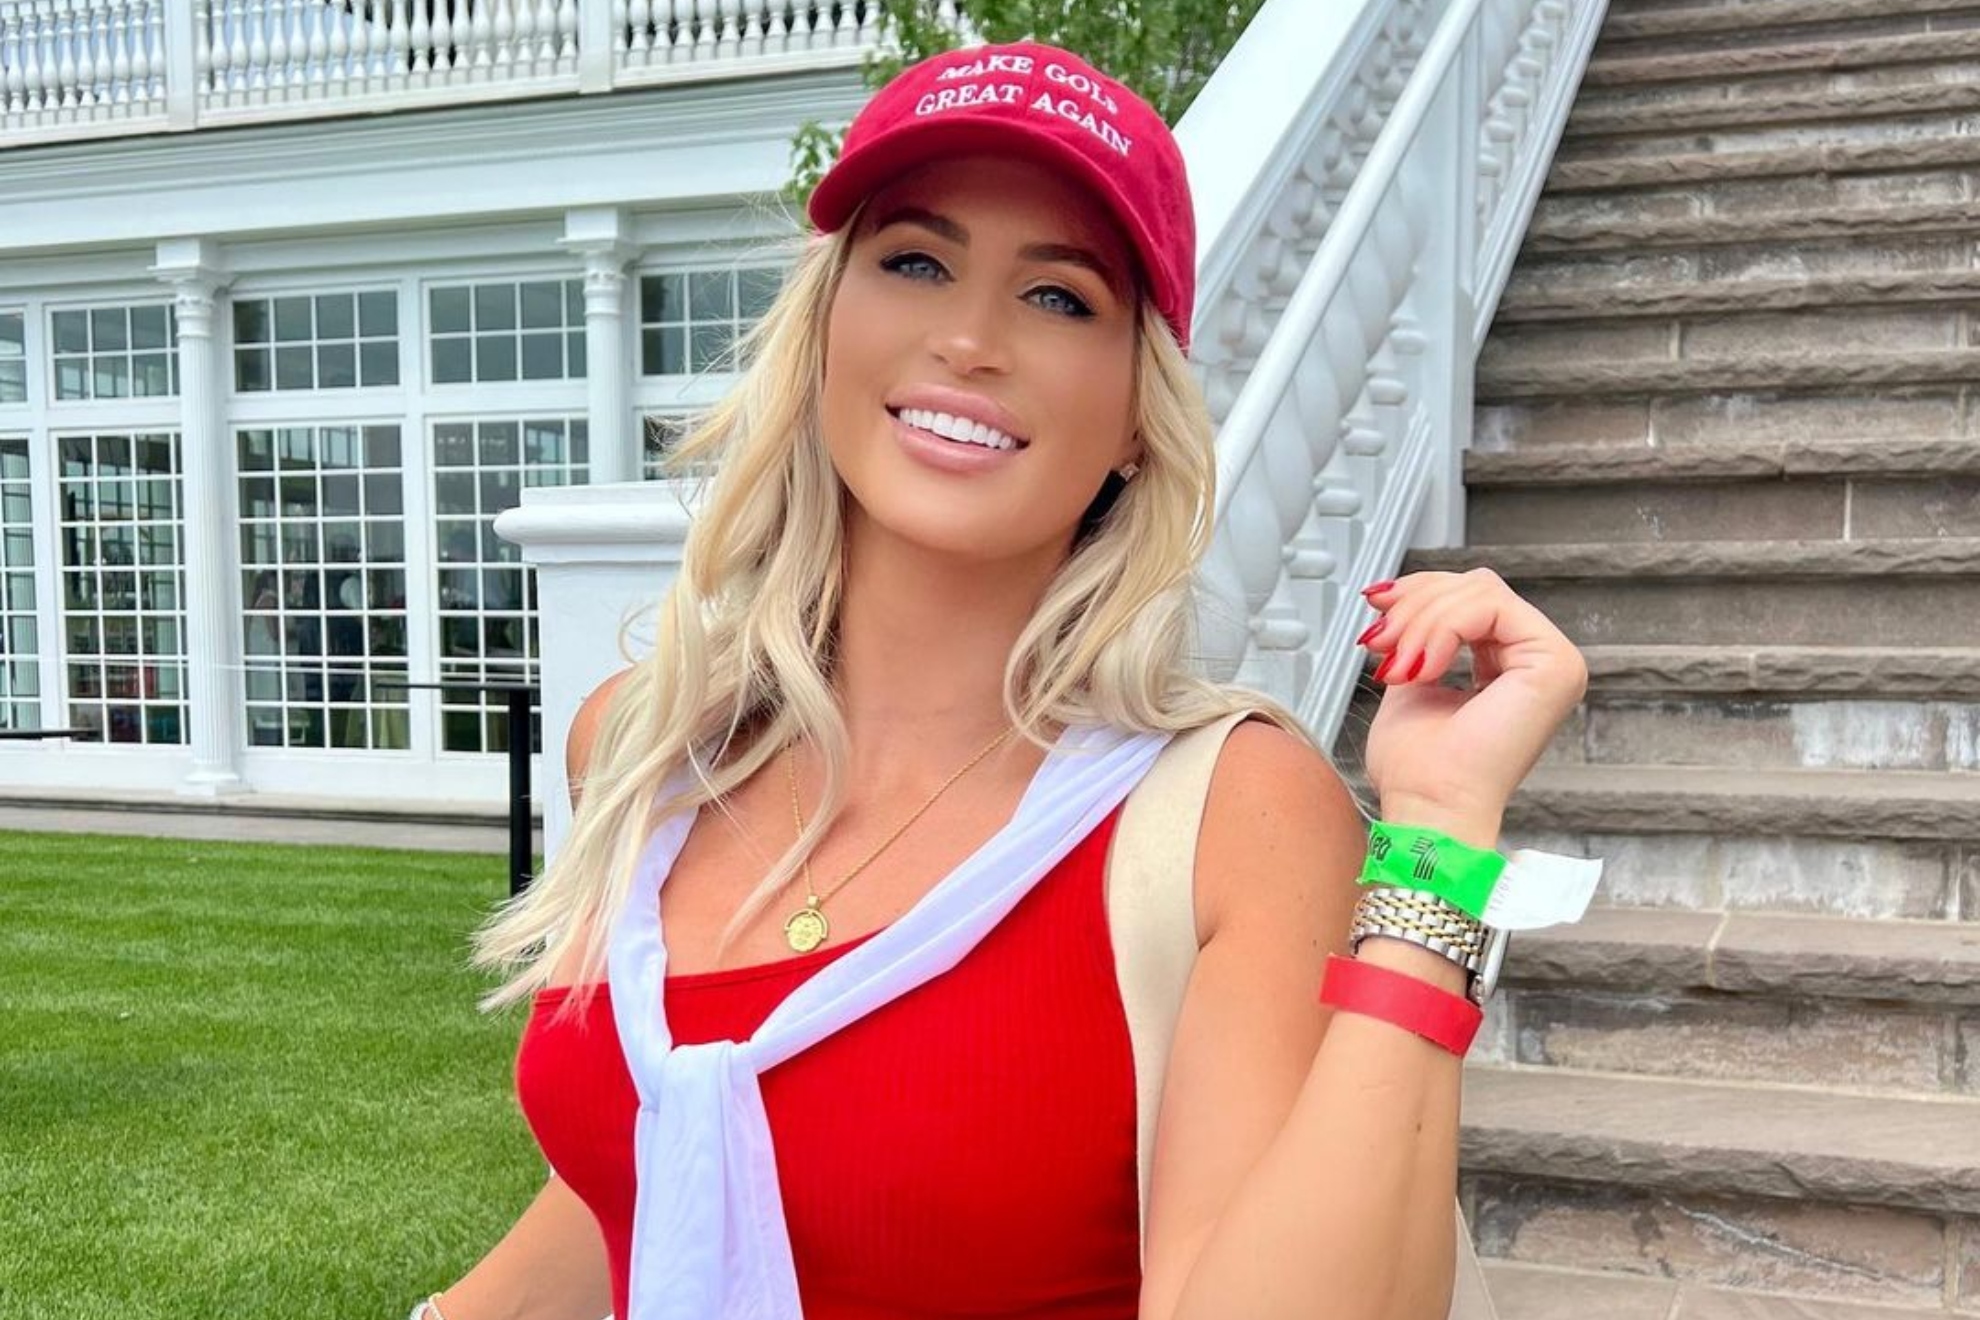 Golf Influencer and model Karin Hart is in it to win it with steady photo shoots